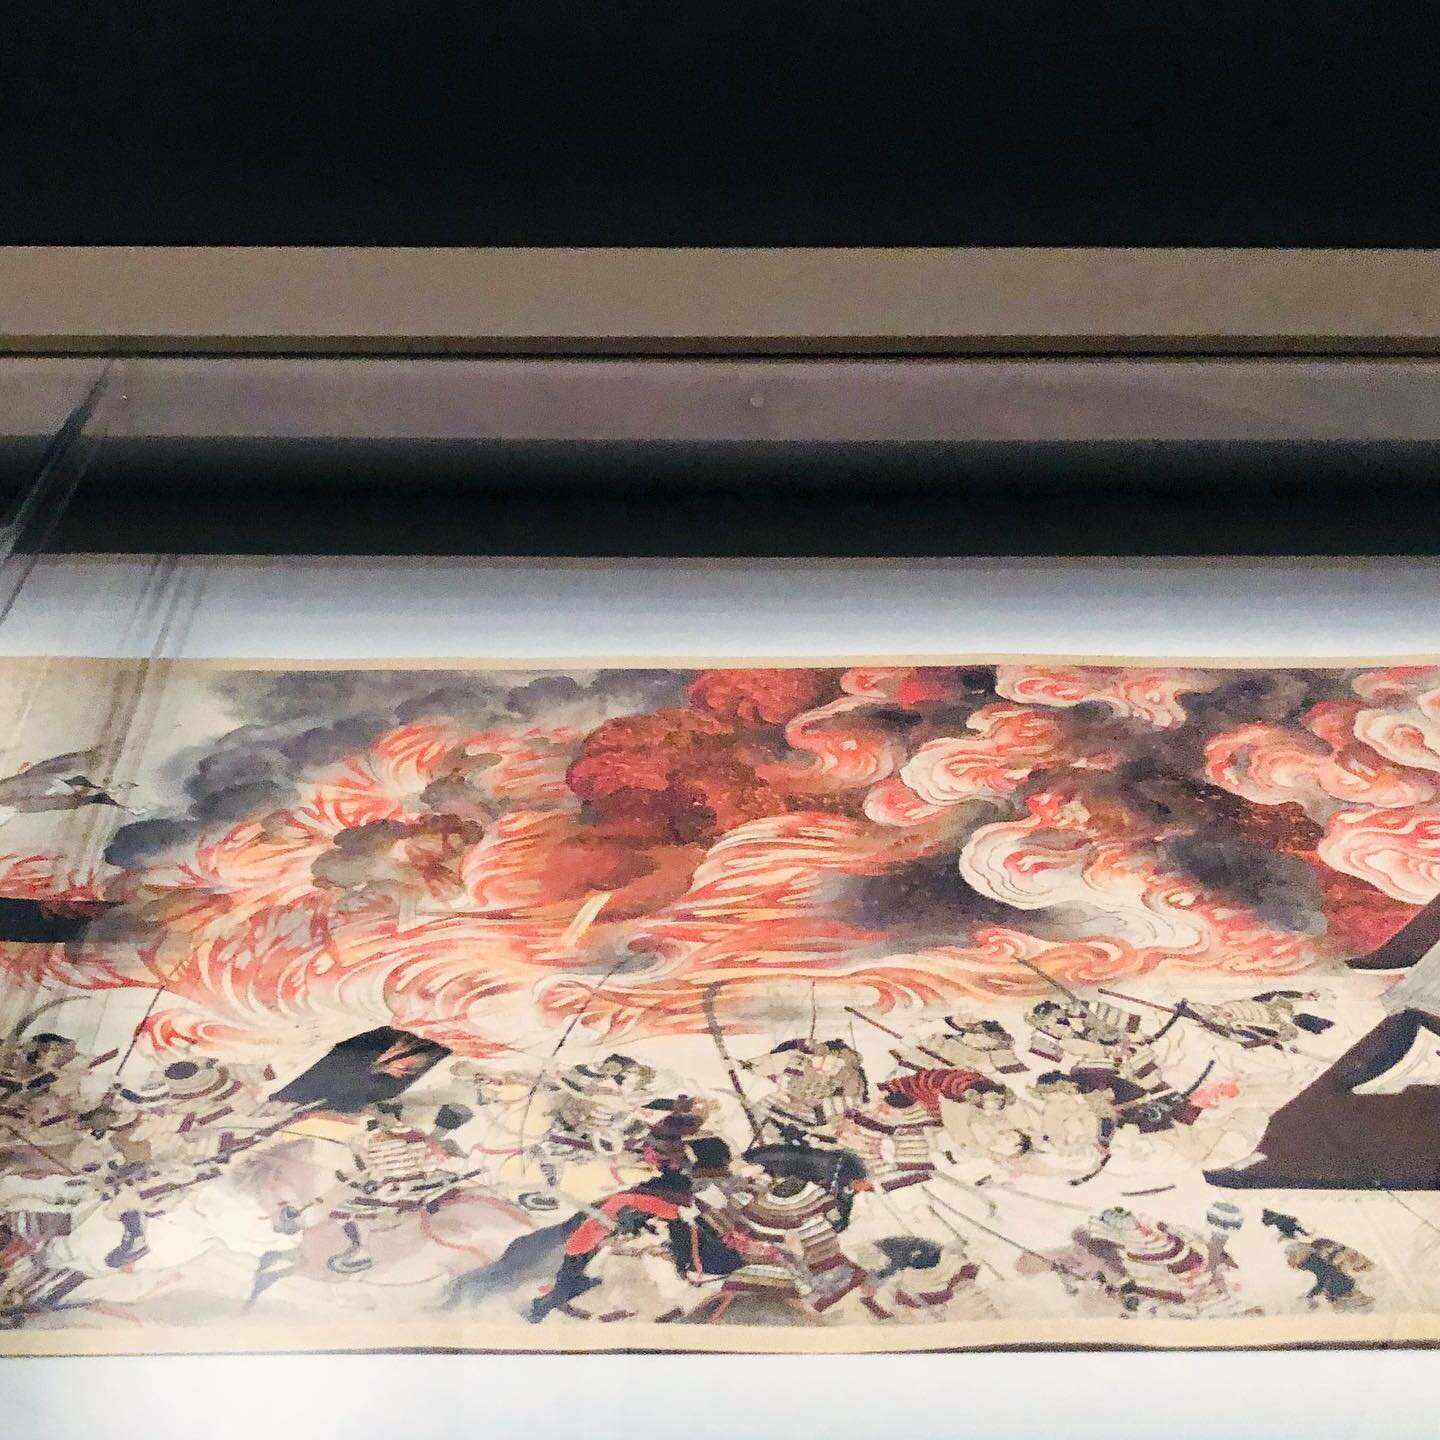 Reposting theee stunning works from the @tokyometropolitanartmuseum which I had the good fortune to visit last month. First, a harrowing conflagration. Then, a scene about beauty in which birds are closely observing each other. Finally, a botanically